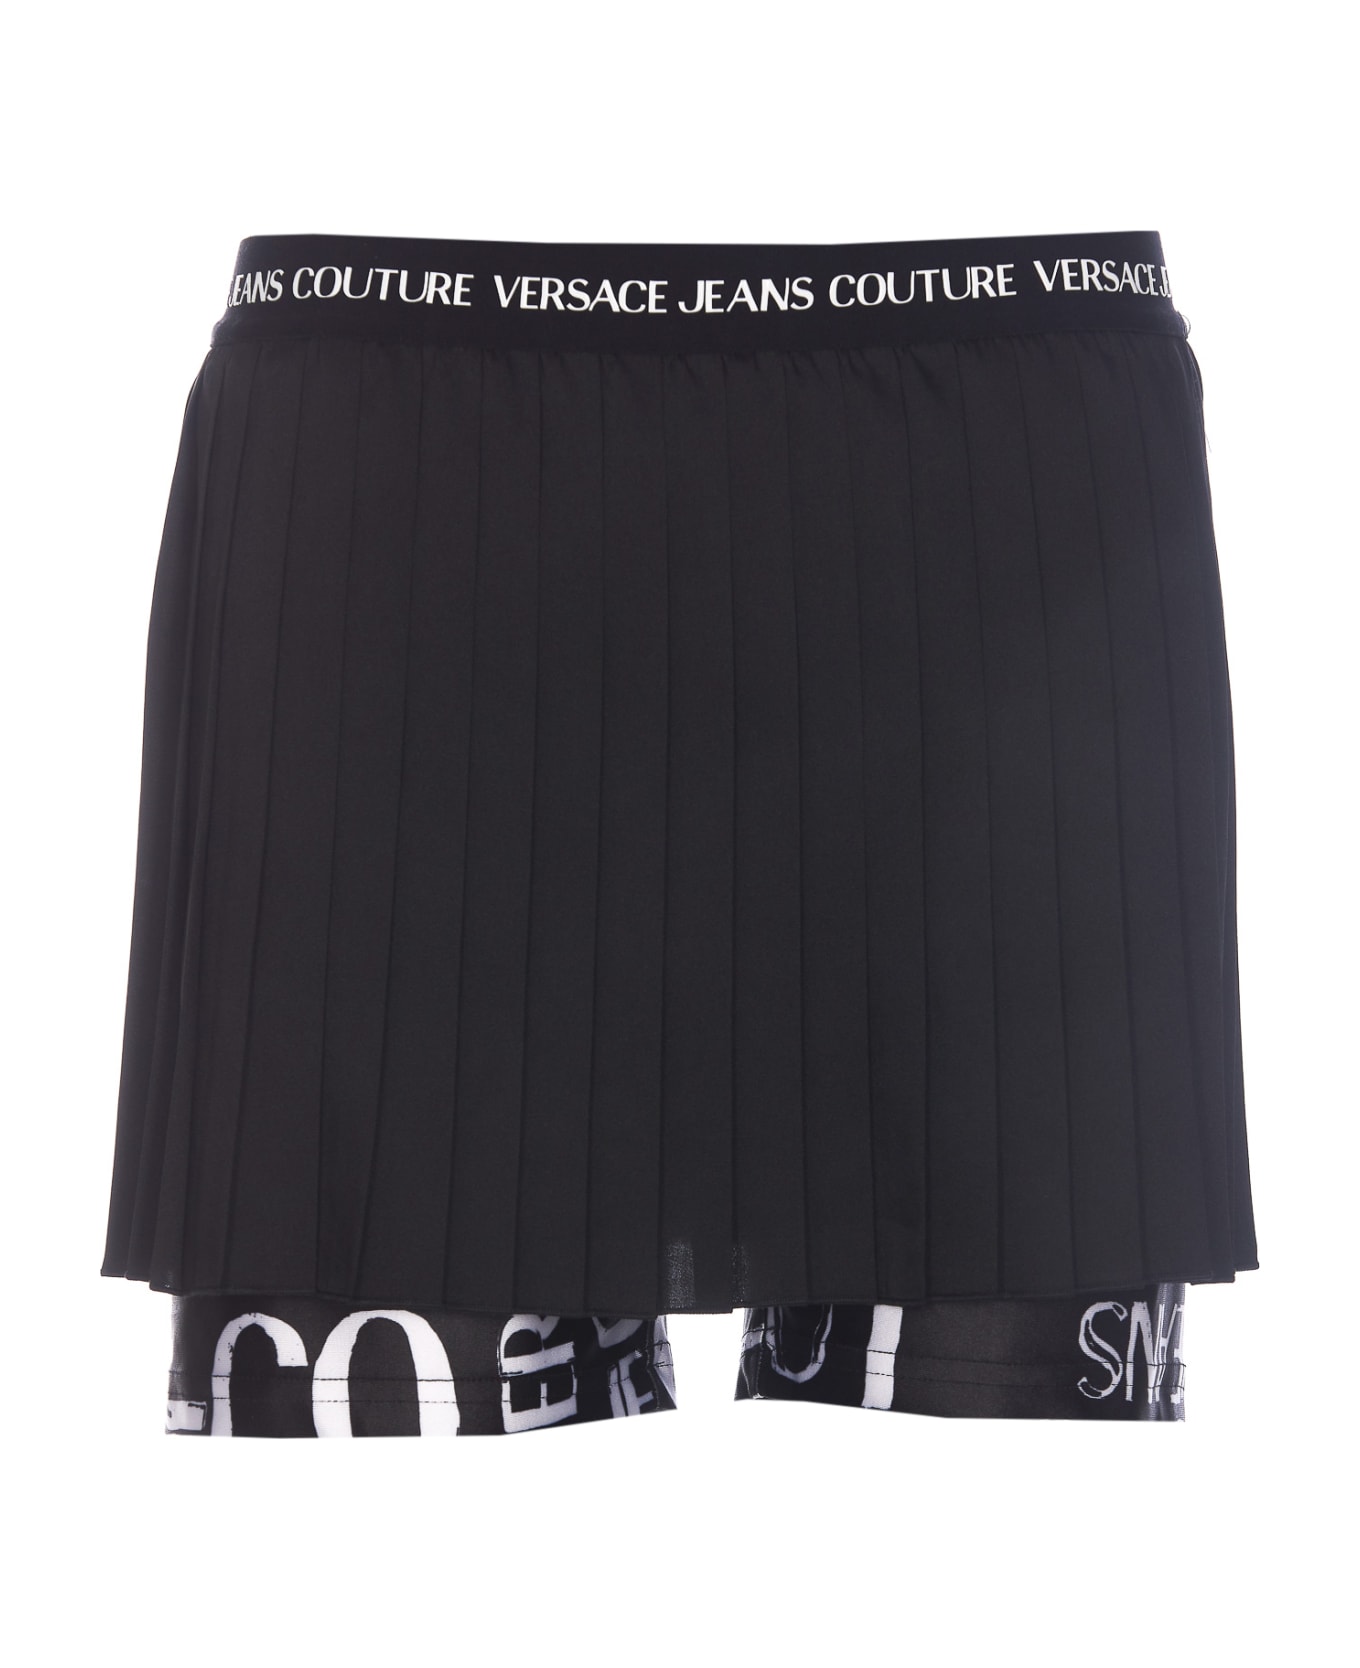 Versace Jeans Couture Leggings - 899 レギンス